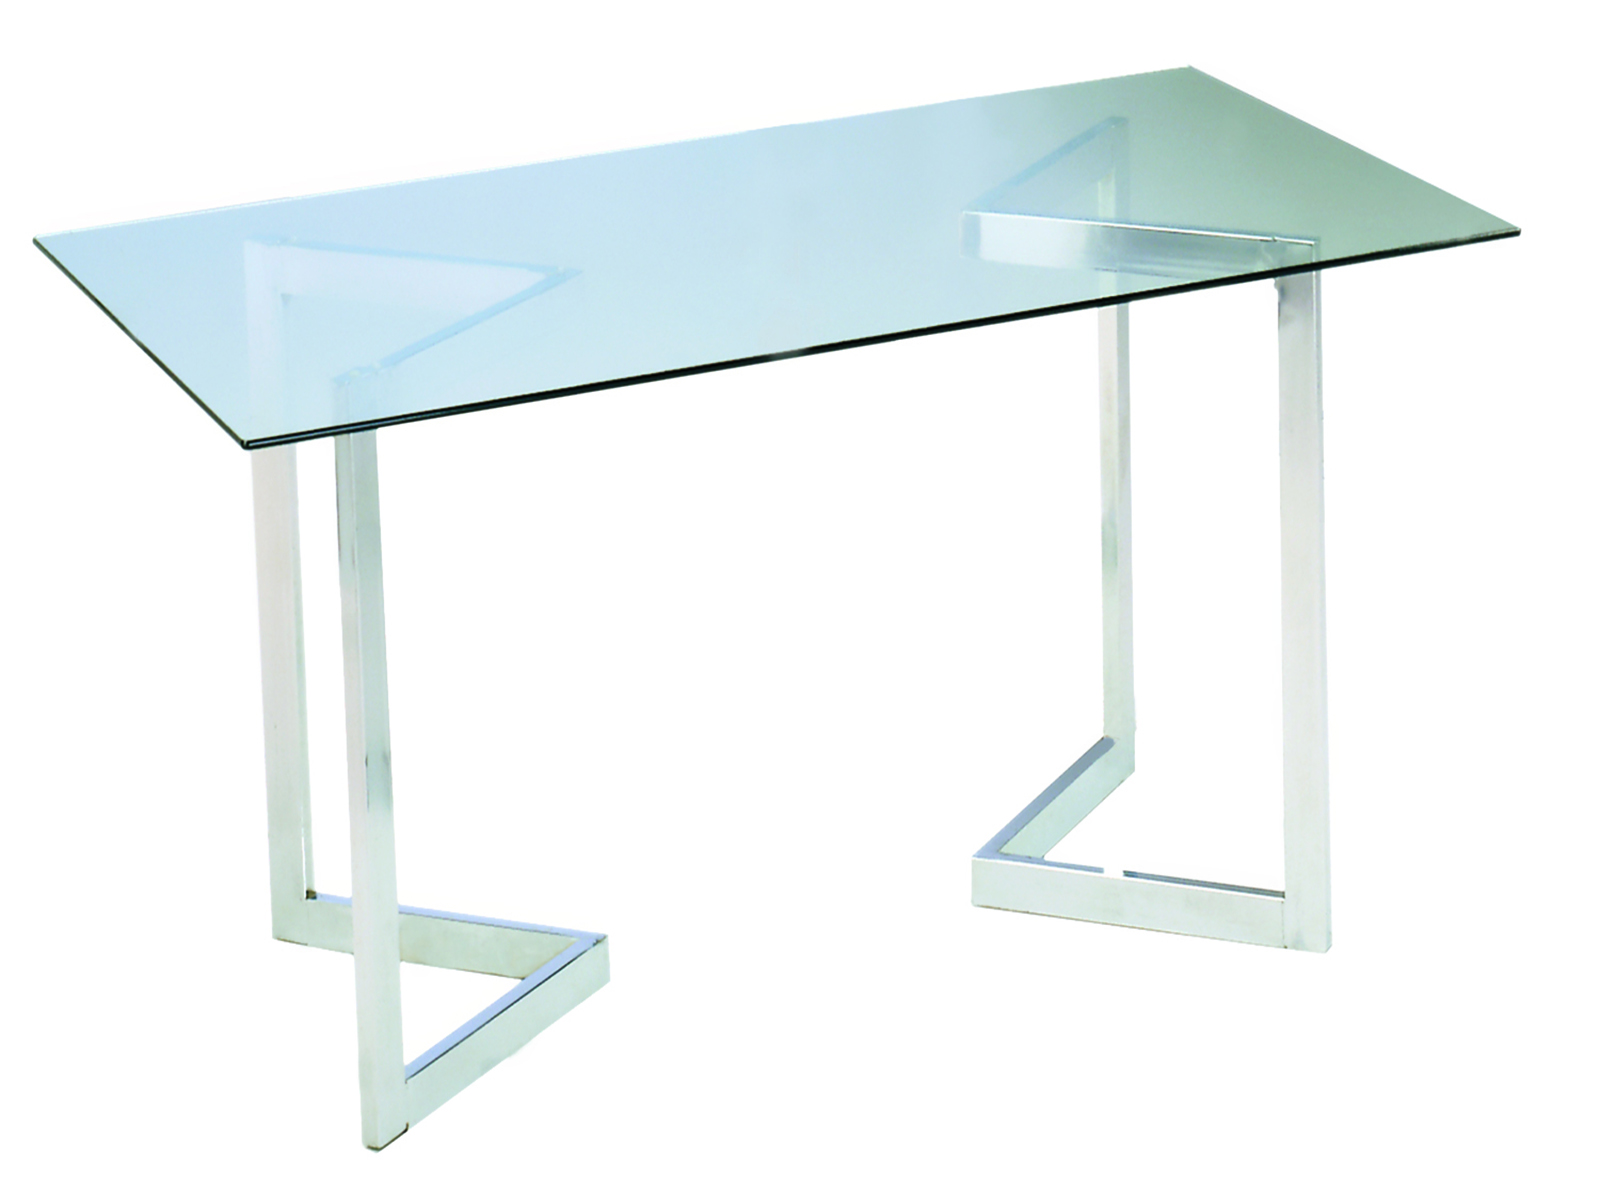 CECT-013 Glass 5 ft Table